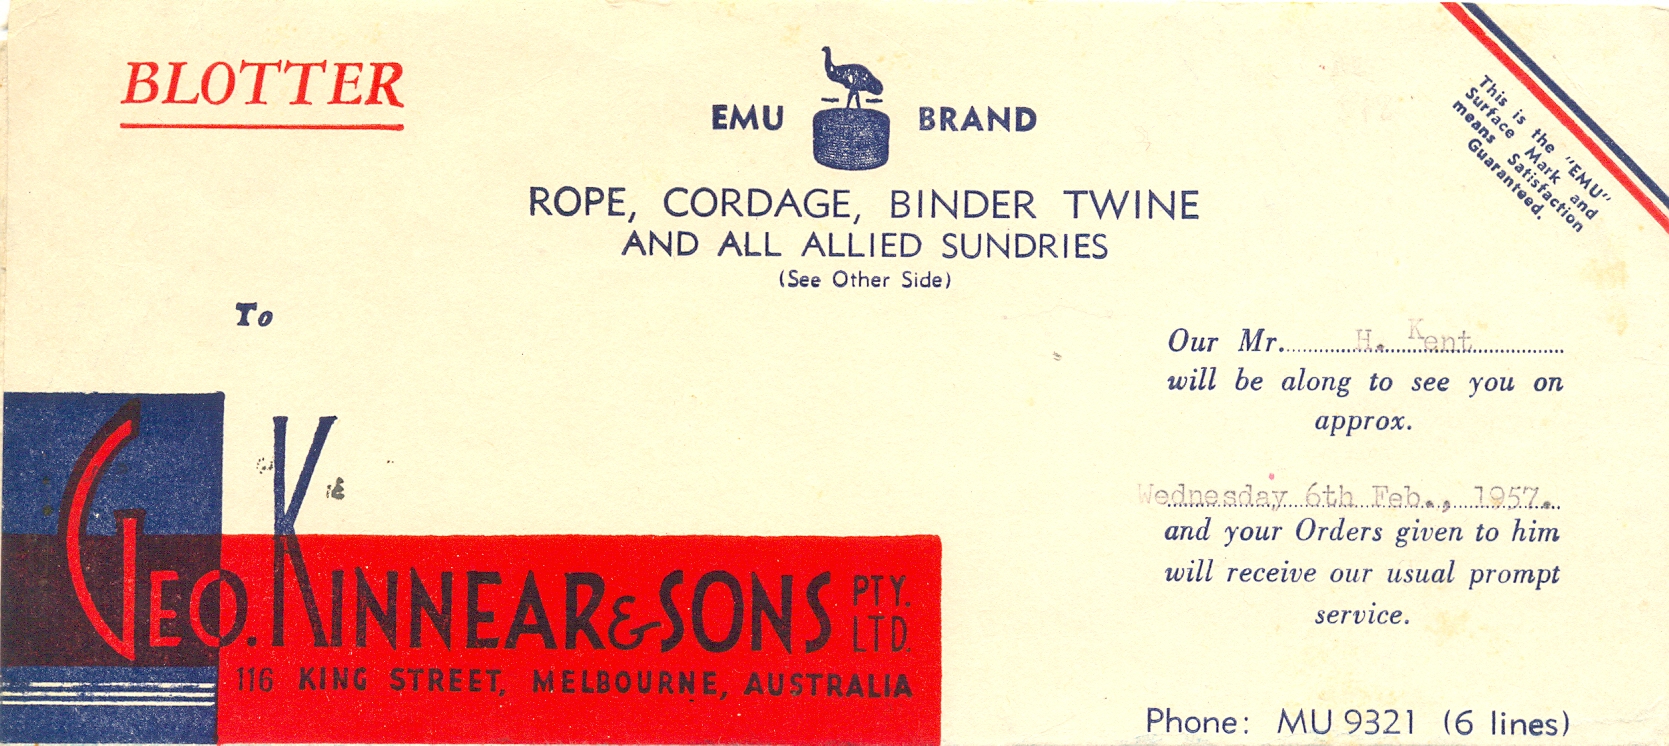 'Emu brand: rope, cordage, binder twine and ll allied sundries', blotter, 1957, 9.5 x 21.5 cm. Collection of Andrew H.